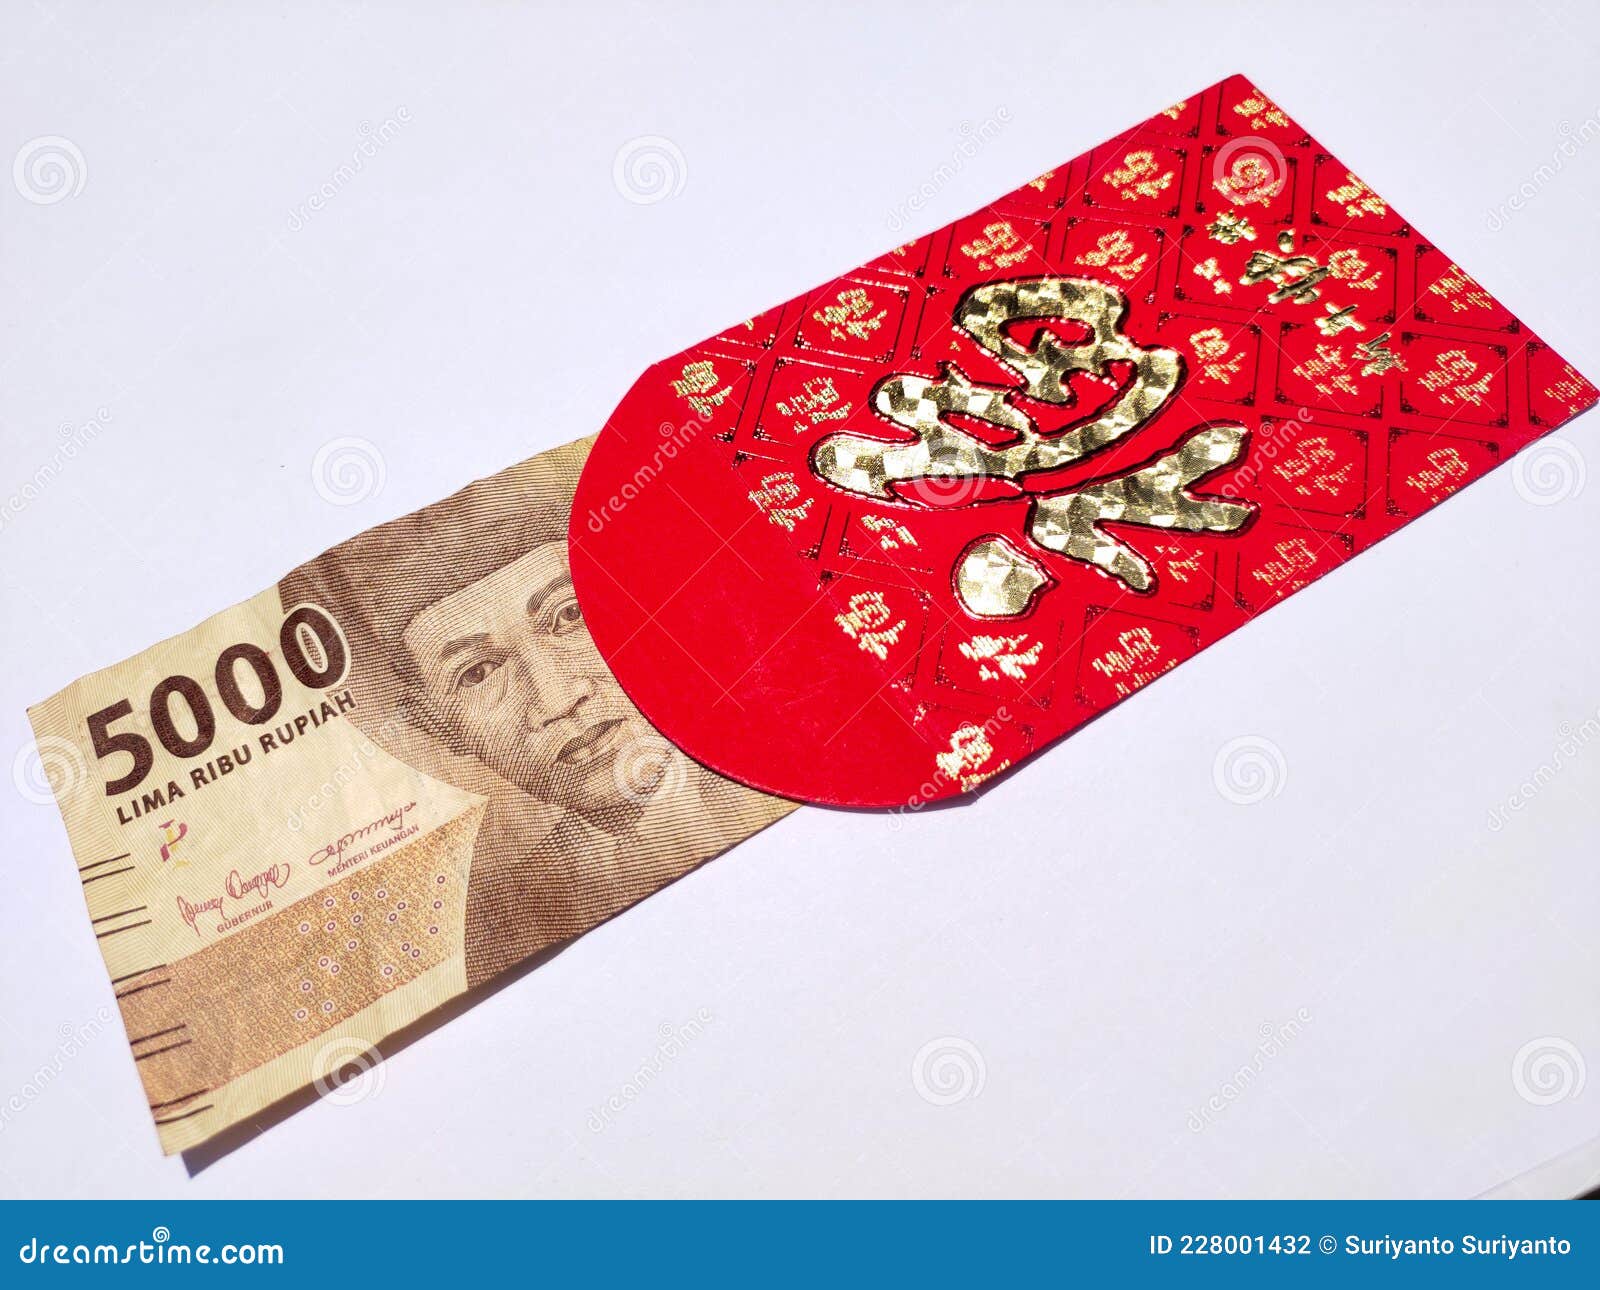 The Tradition of Giving Red Envelopes or Red Envelopes Filled with